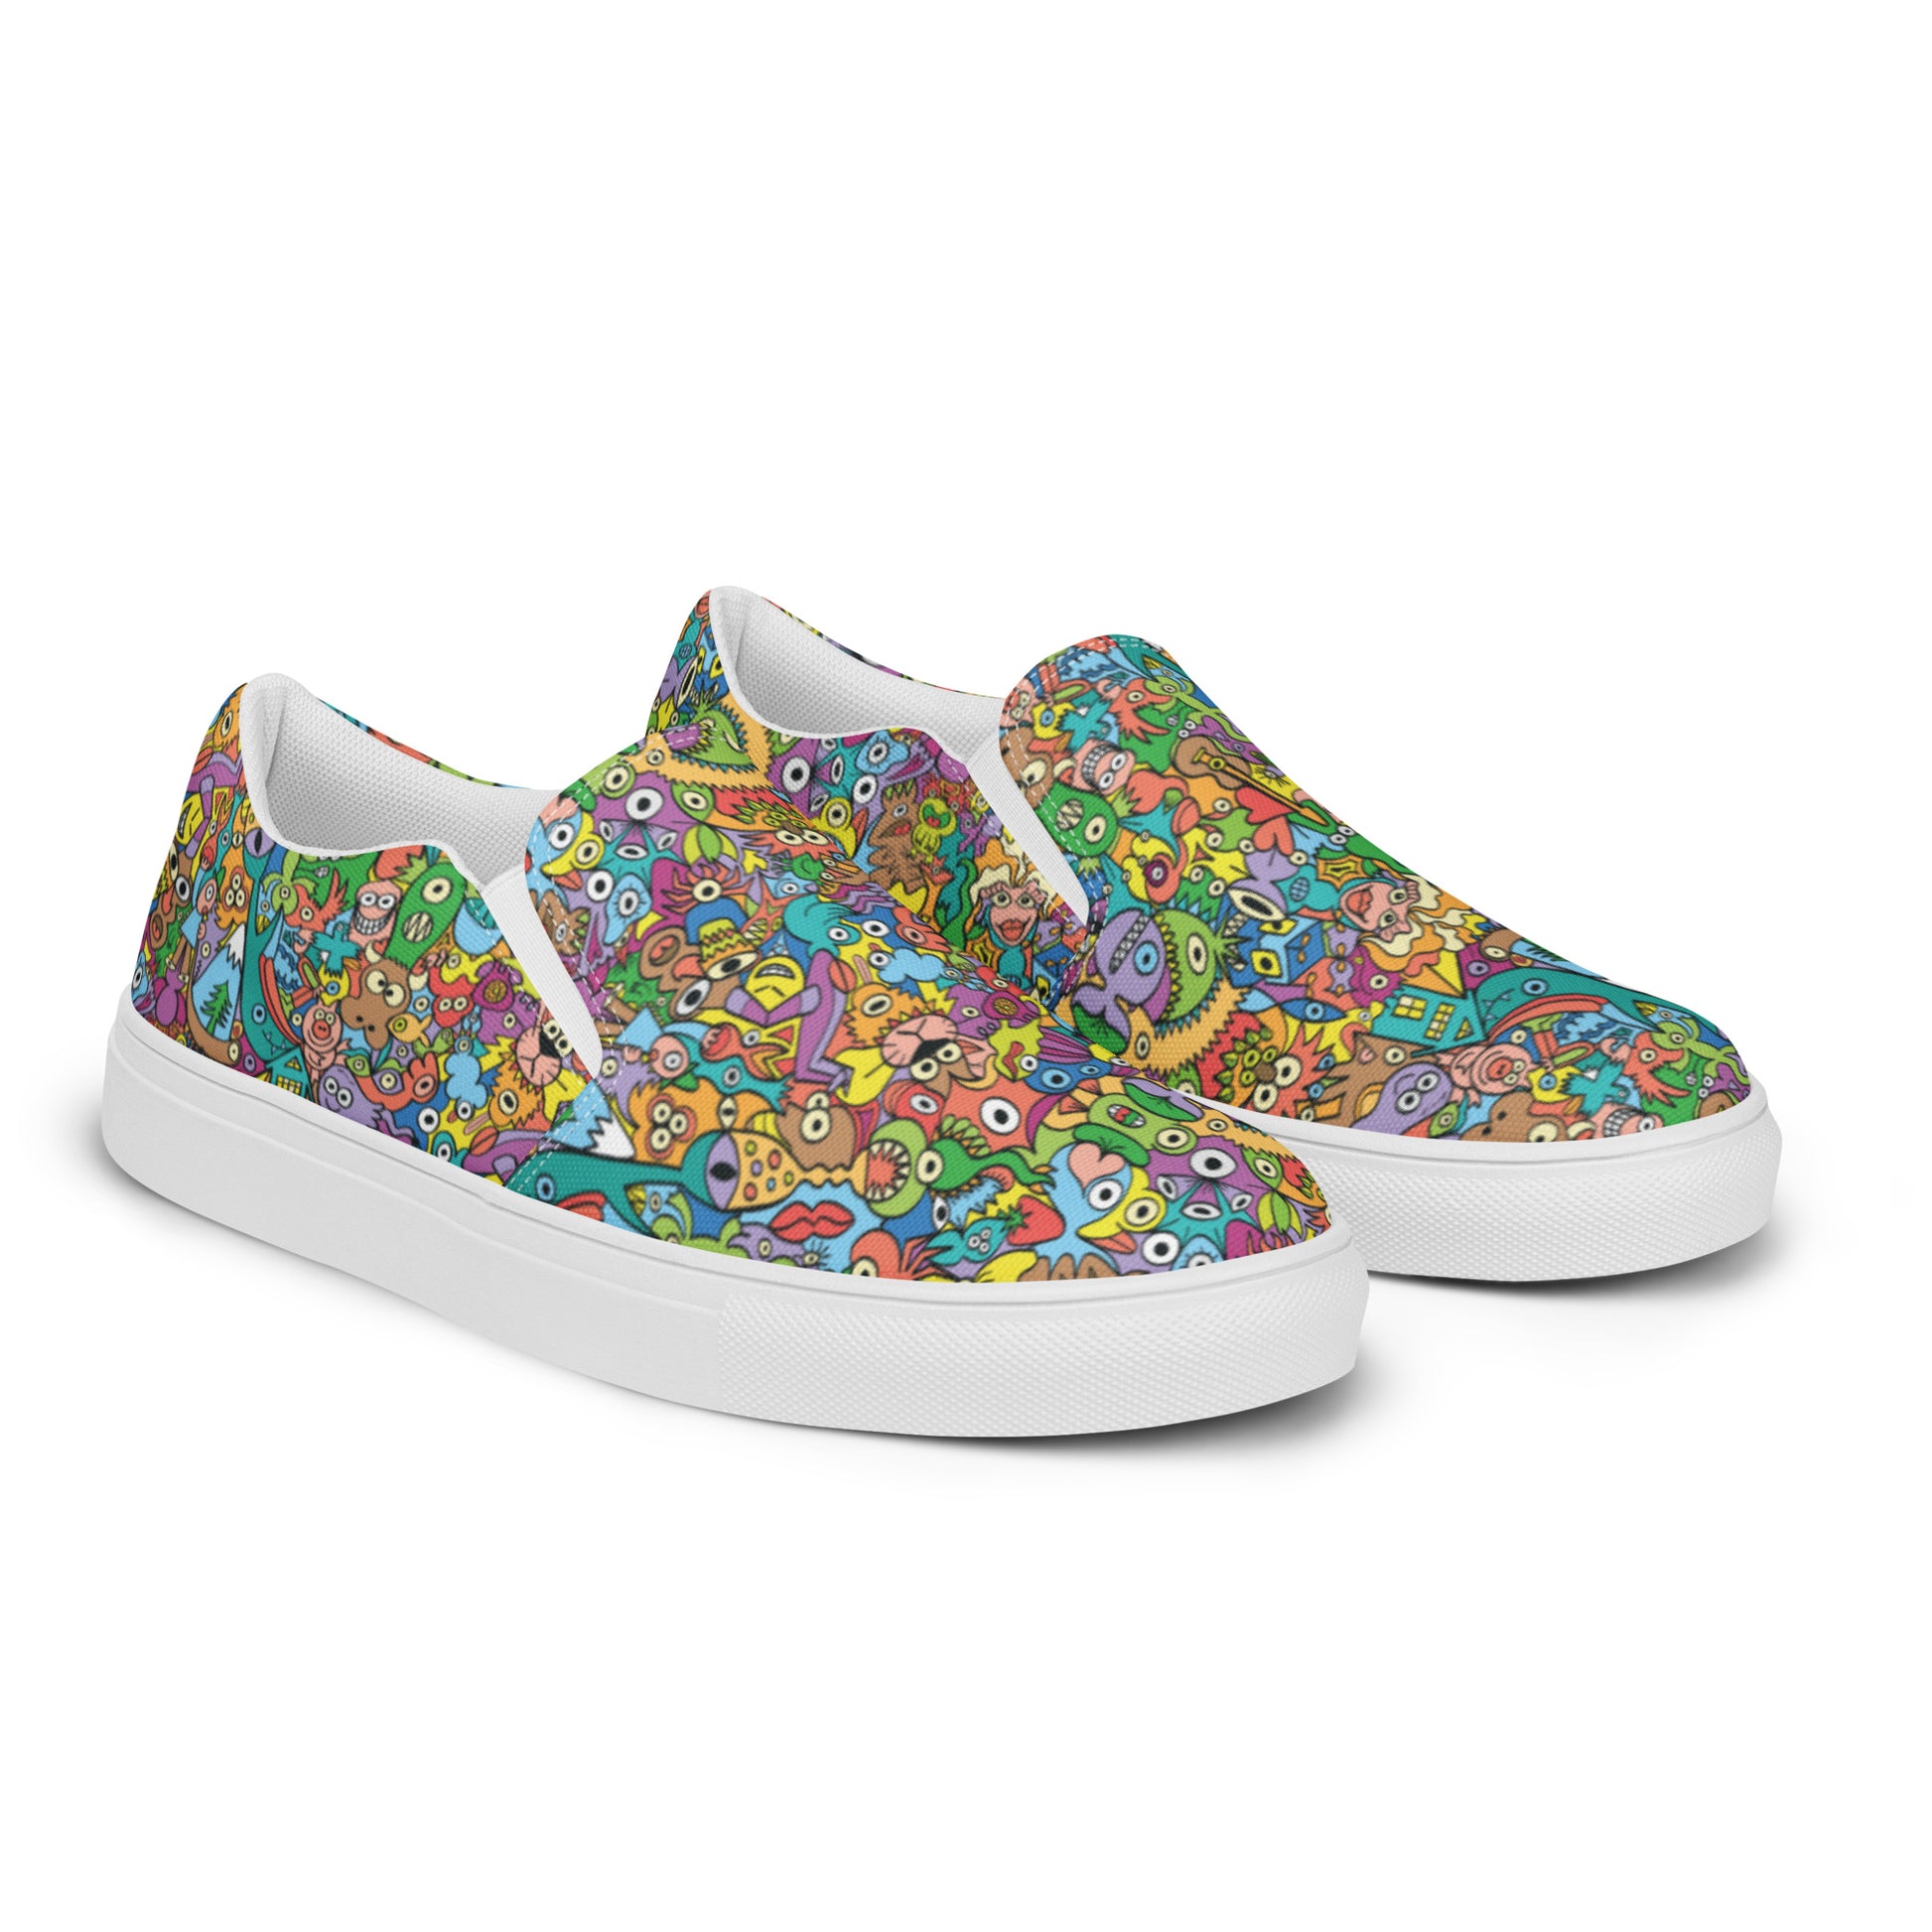 Cheerful crowd enjoying a lively carnival Women’s slip-on canvas shoes. Overview